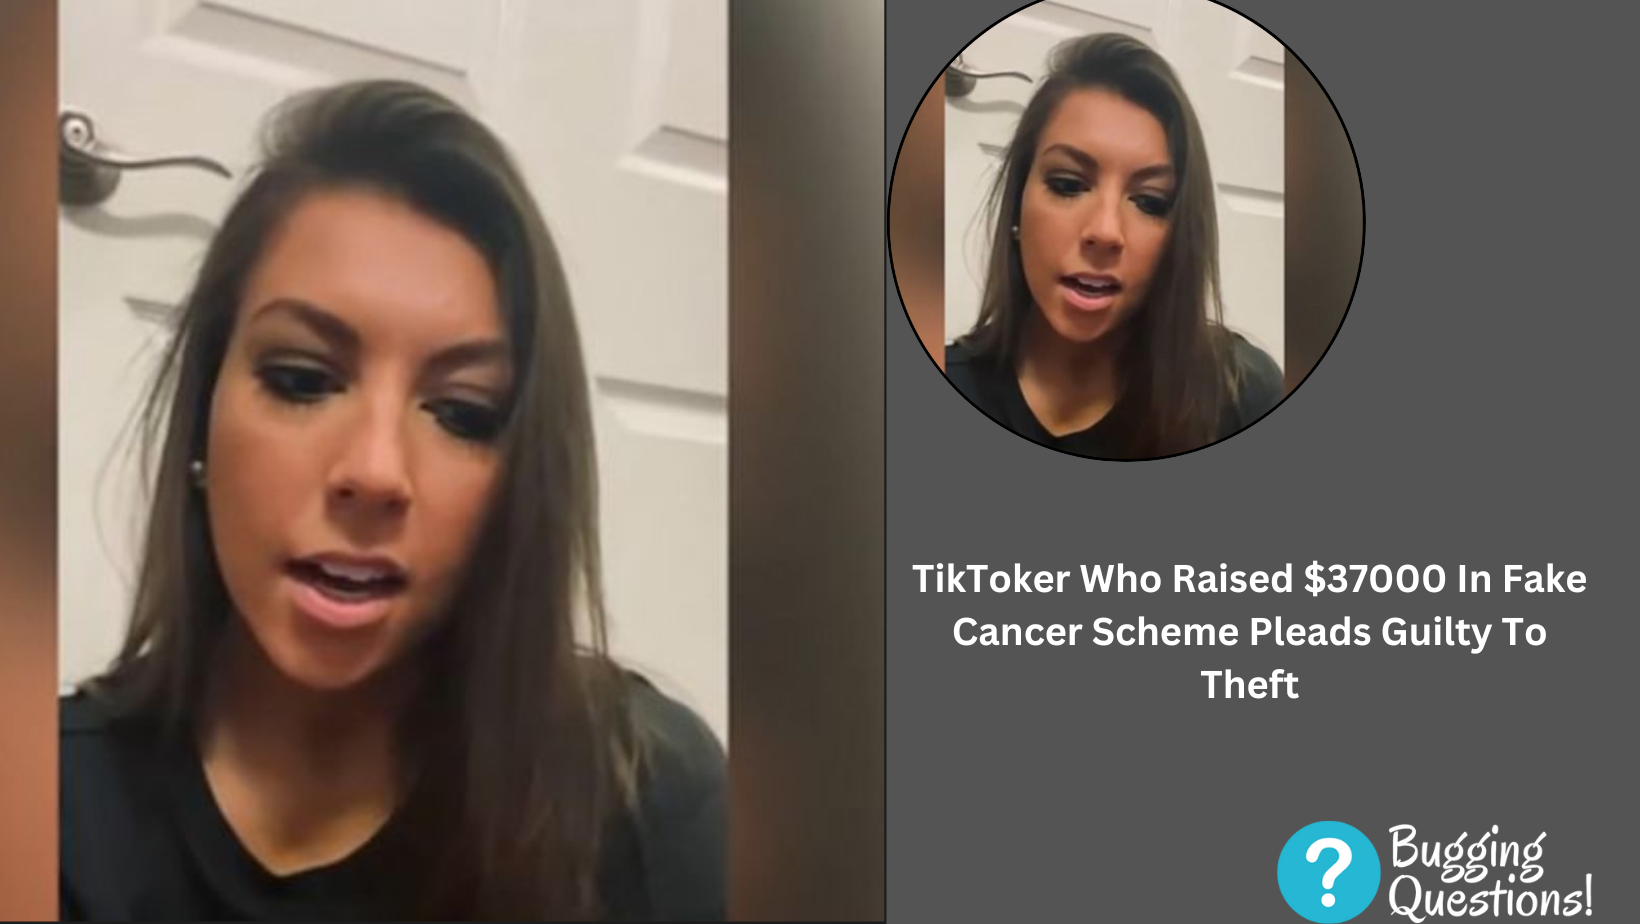 TikToker Who Raised $37000 In Fake Cancer Scheme Pleads Guilty To Theft